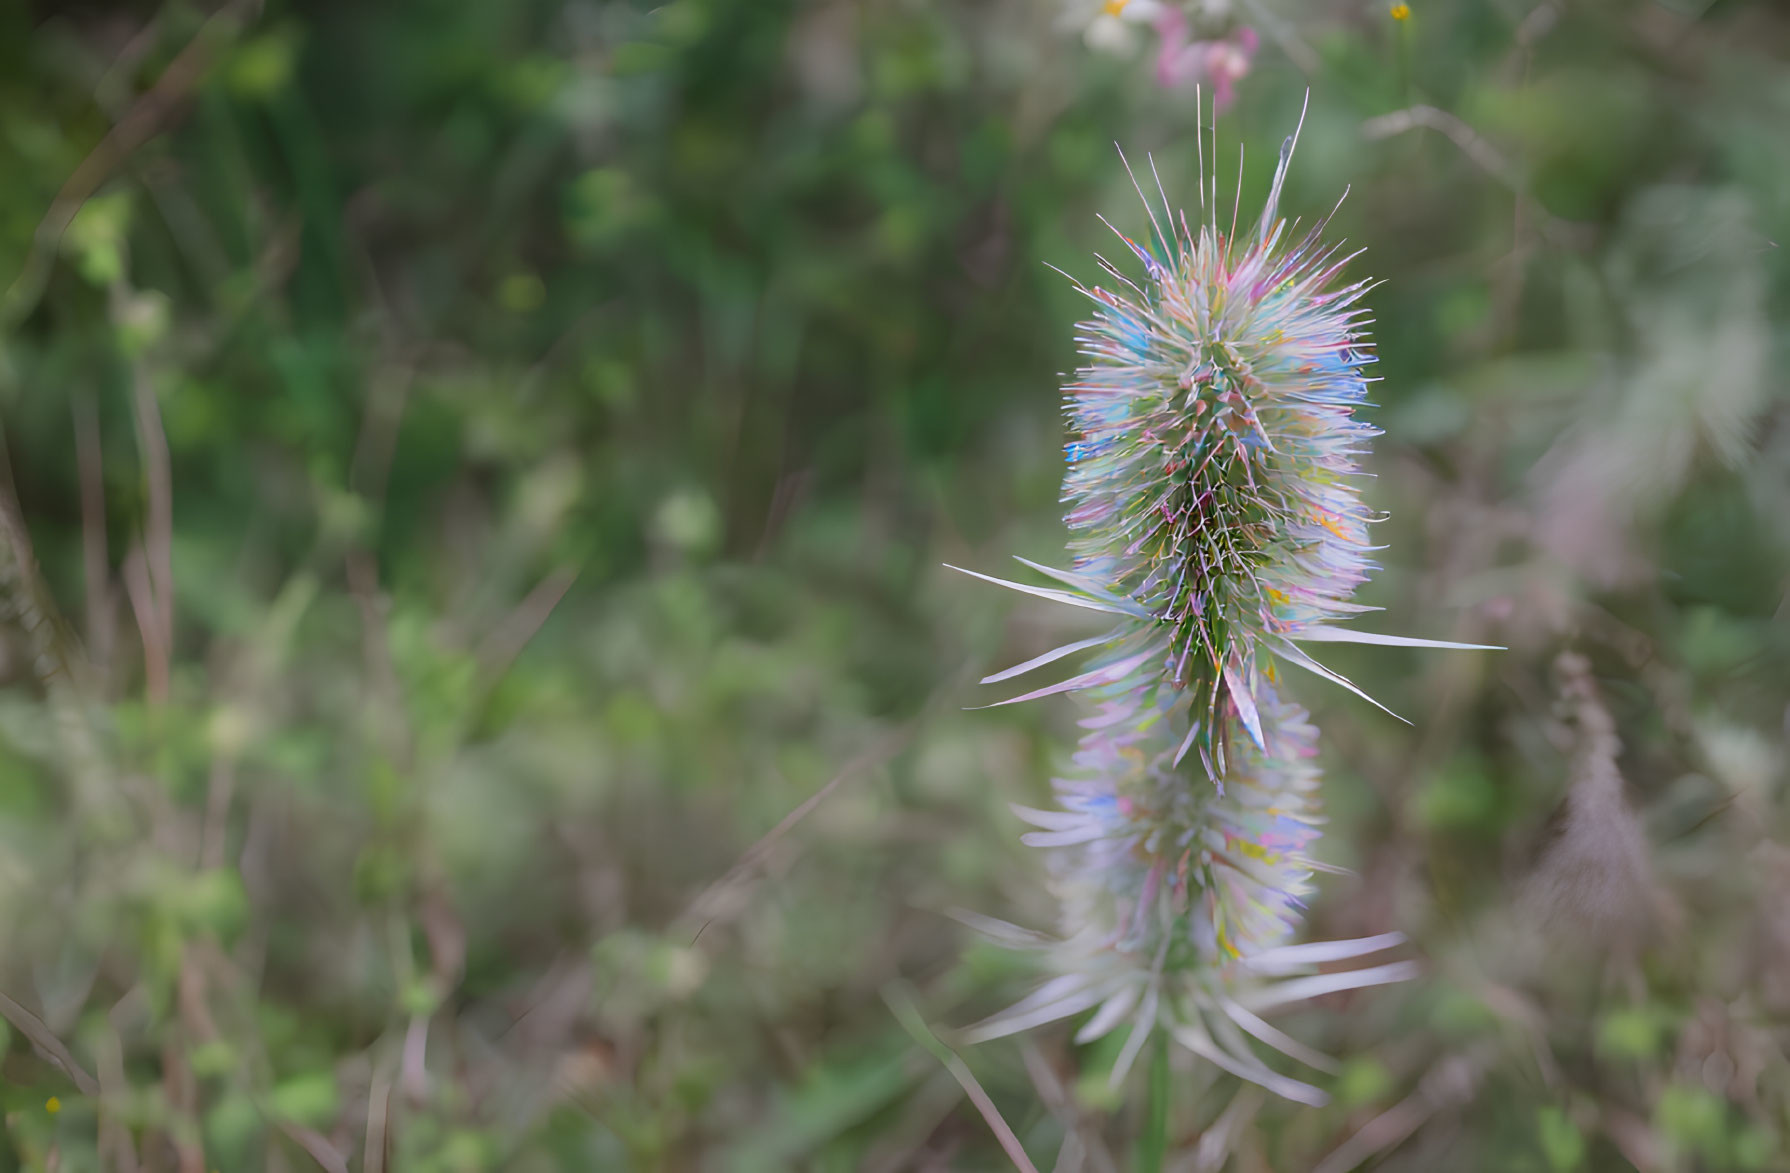 Slender, Spiky Plant with Blue to Pink Gradient on Blurred Green Background